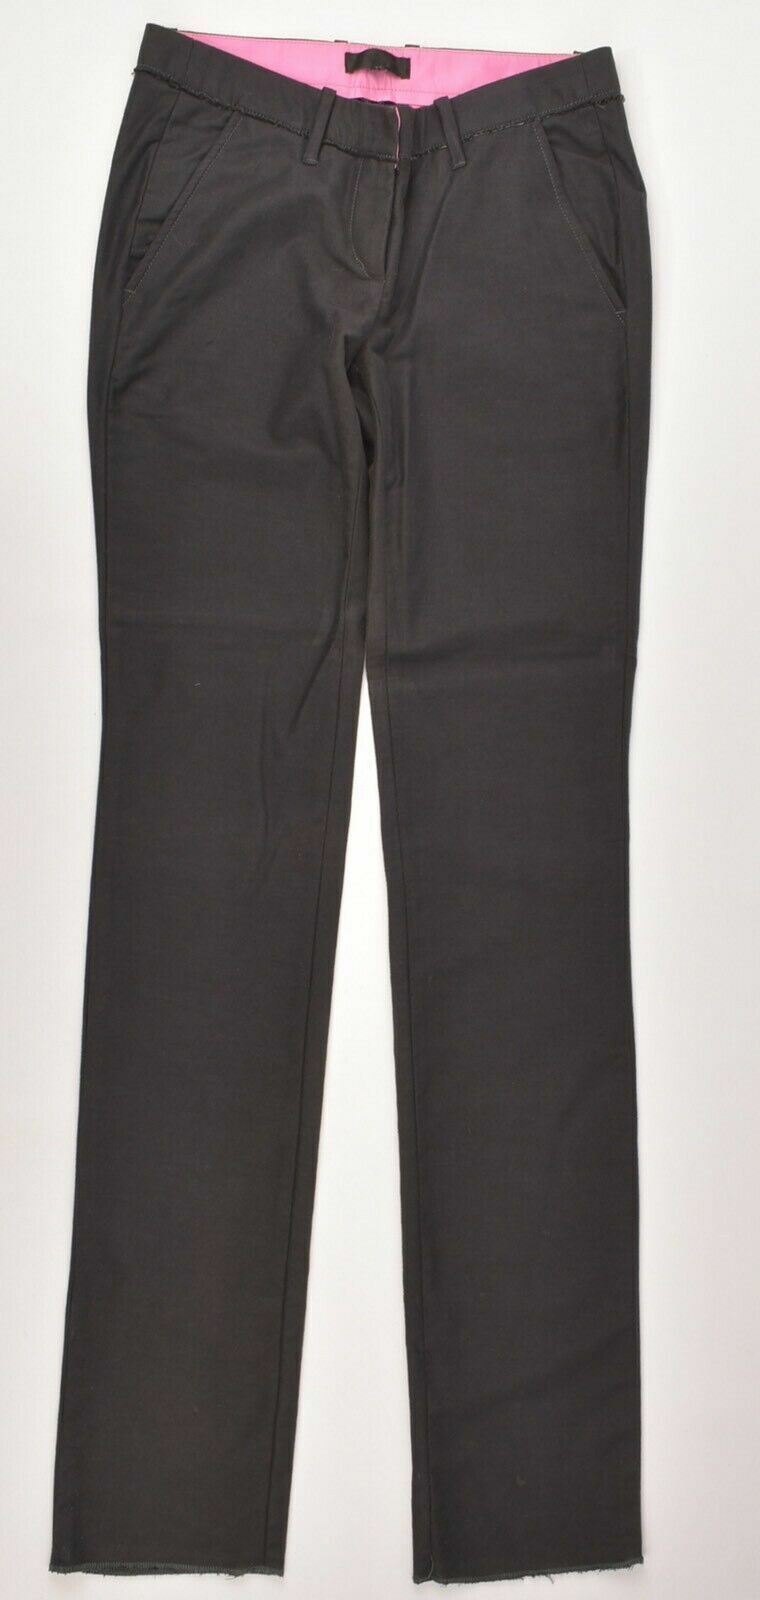 COSTUME NATIONAL Women's Black Wool Tailored Trousers, size W28